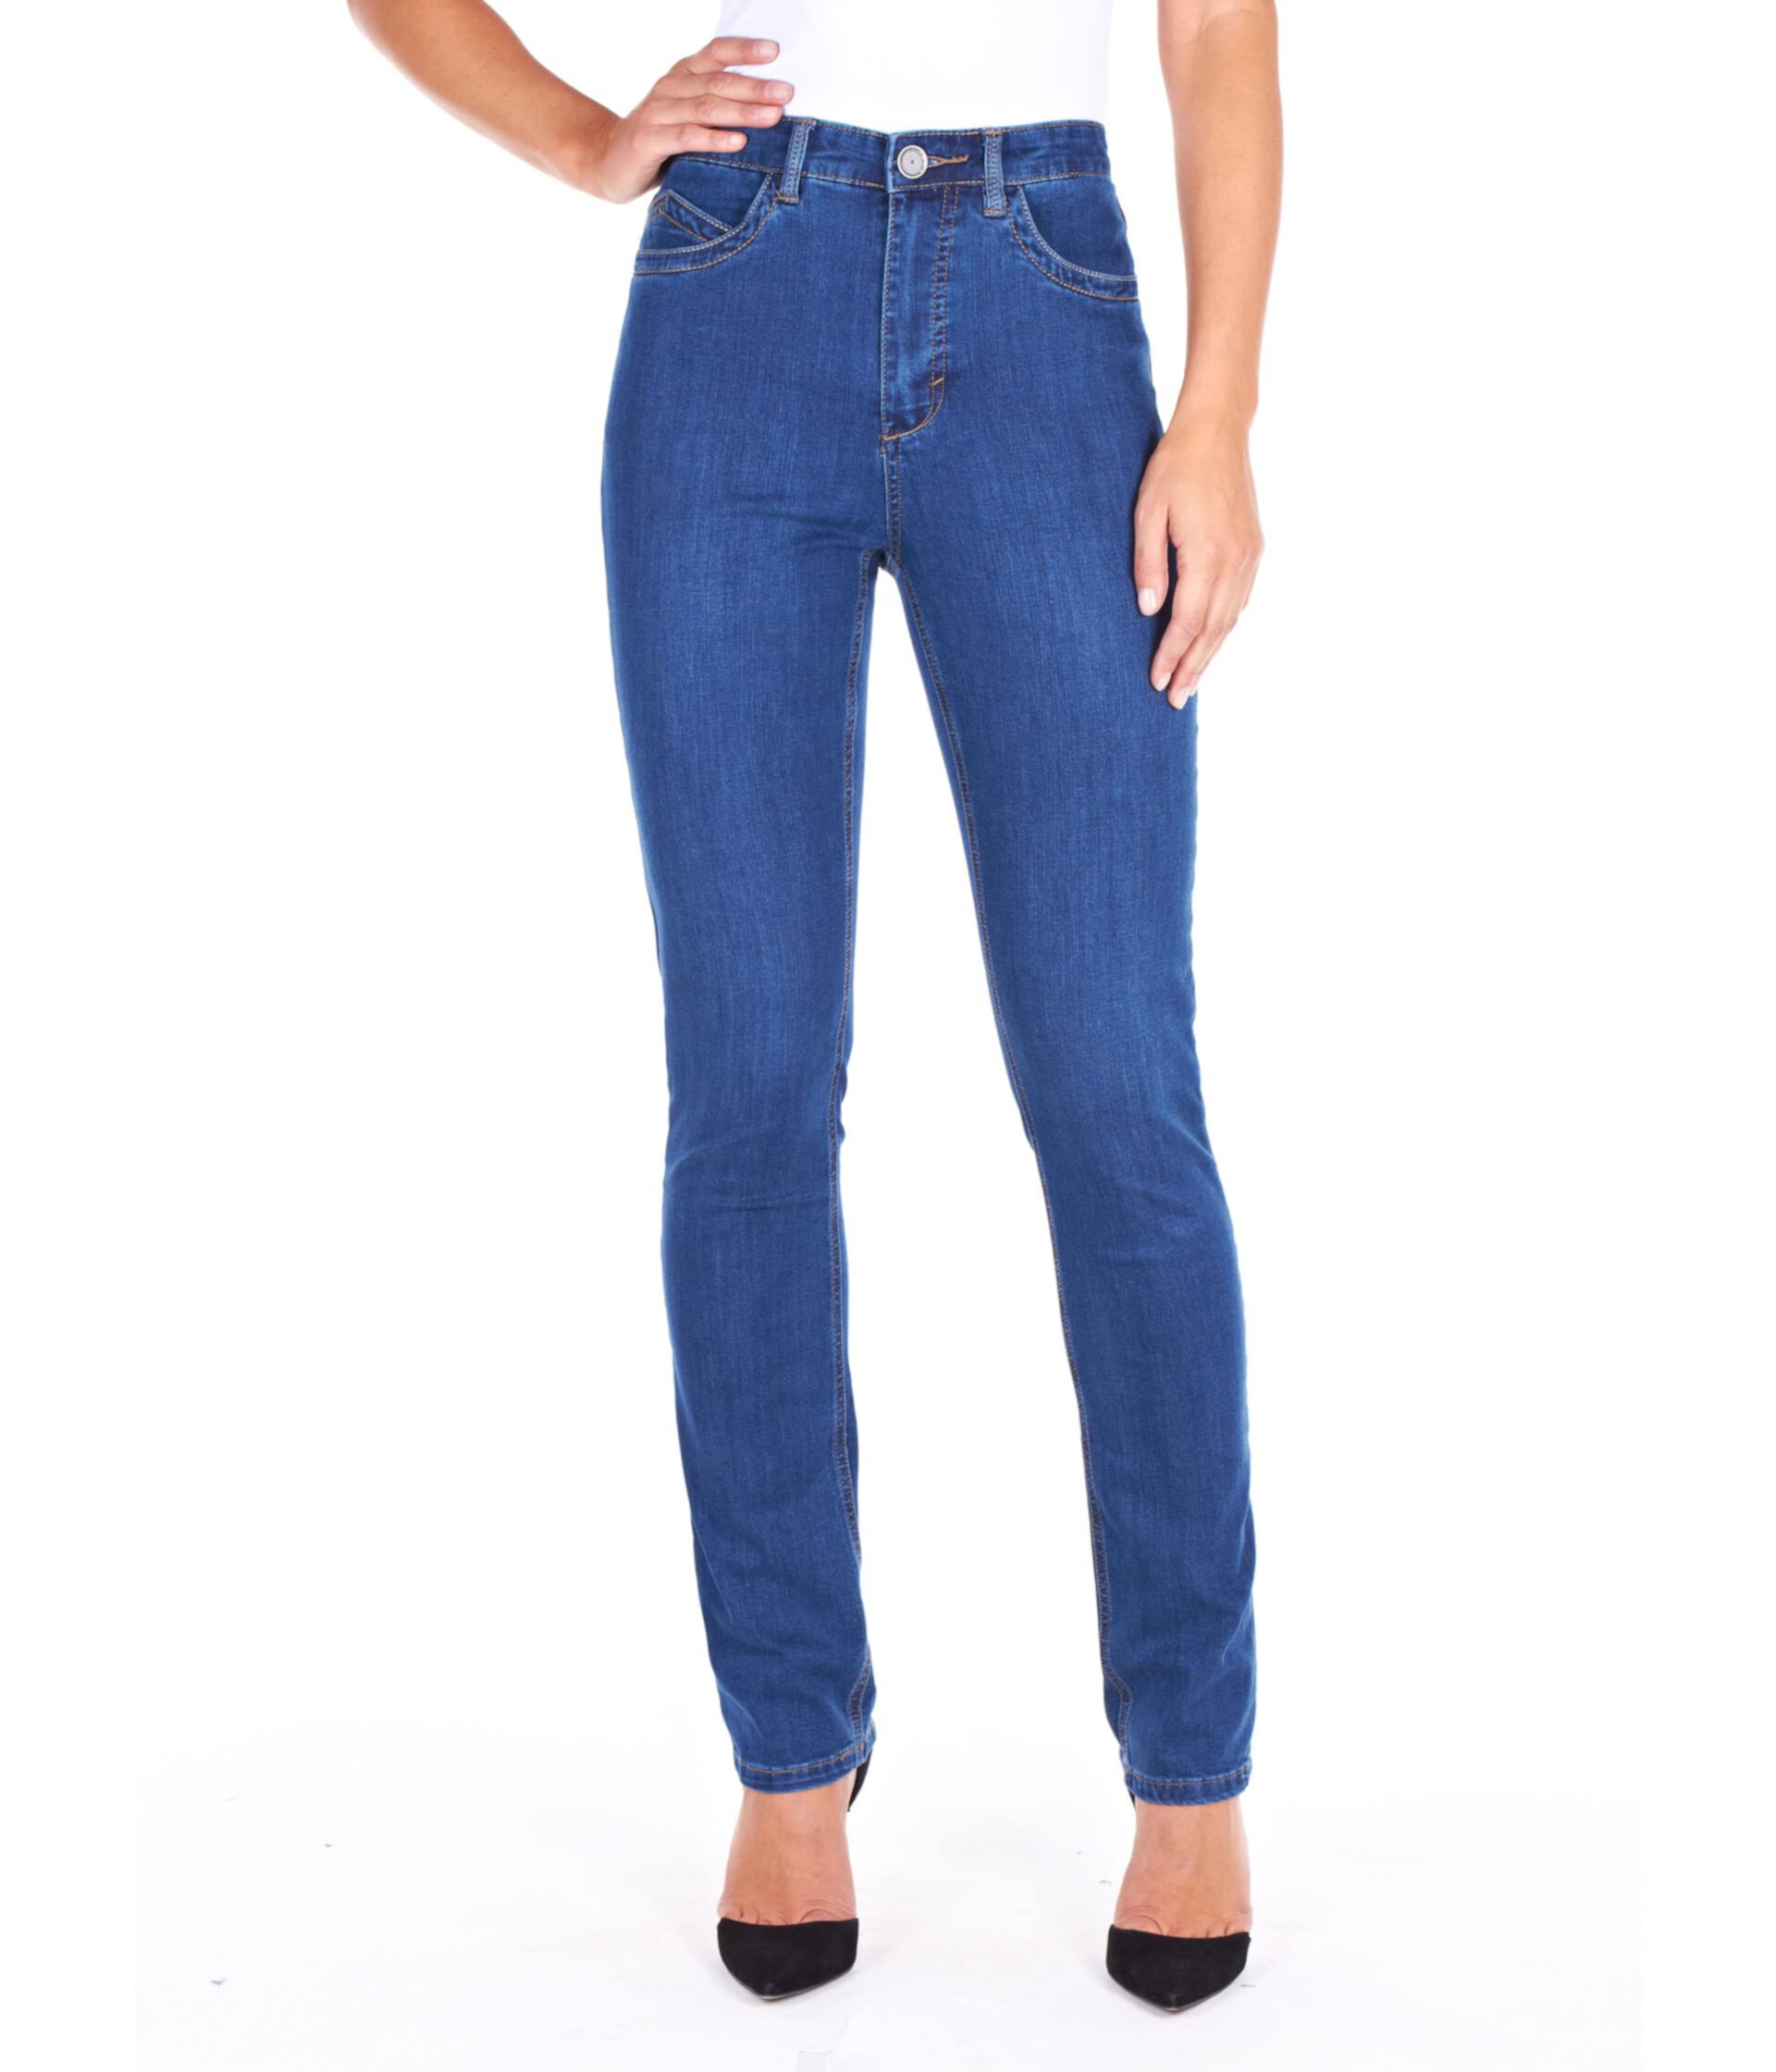 Supreme Denim Suzanne Relaxed Slim Leg in Delight FDJ French Dressing Jeans